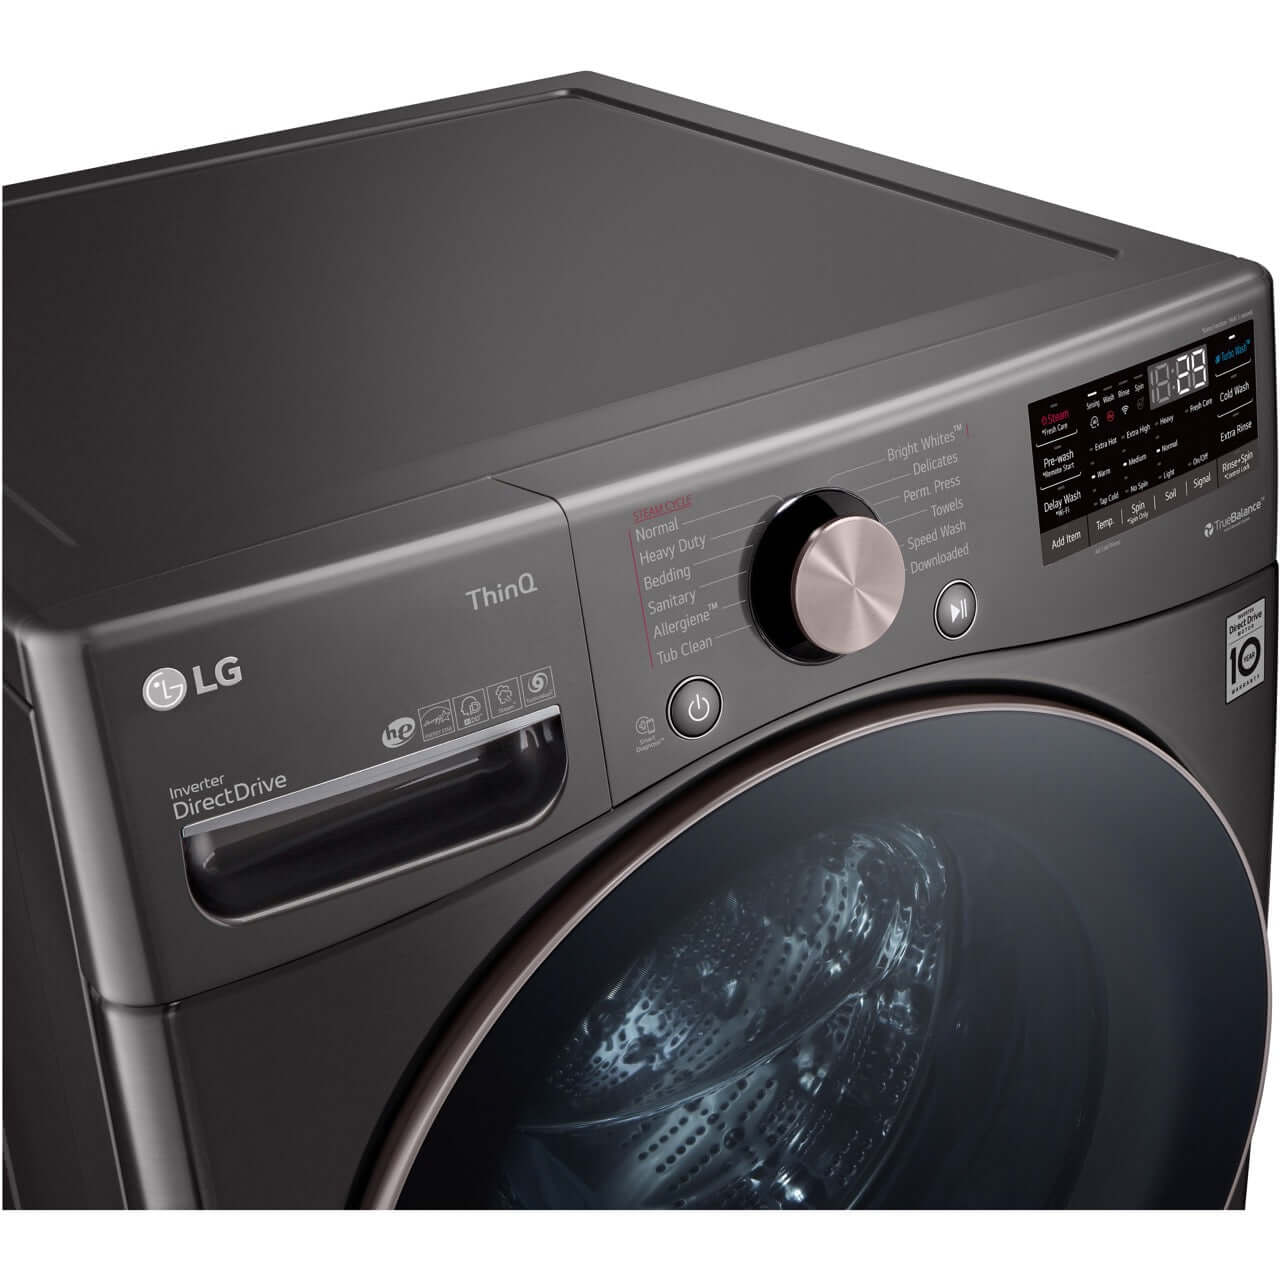 LG 27 In. 4.5-Cu. Ft. Front Load Washer with Steam Technology in Black Steel (WM4000HBA)